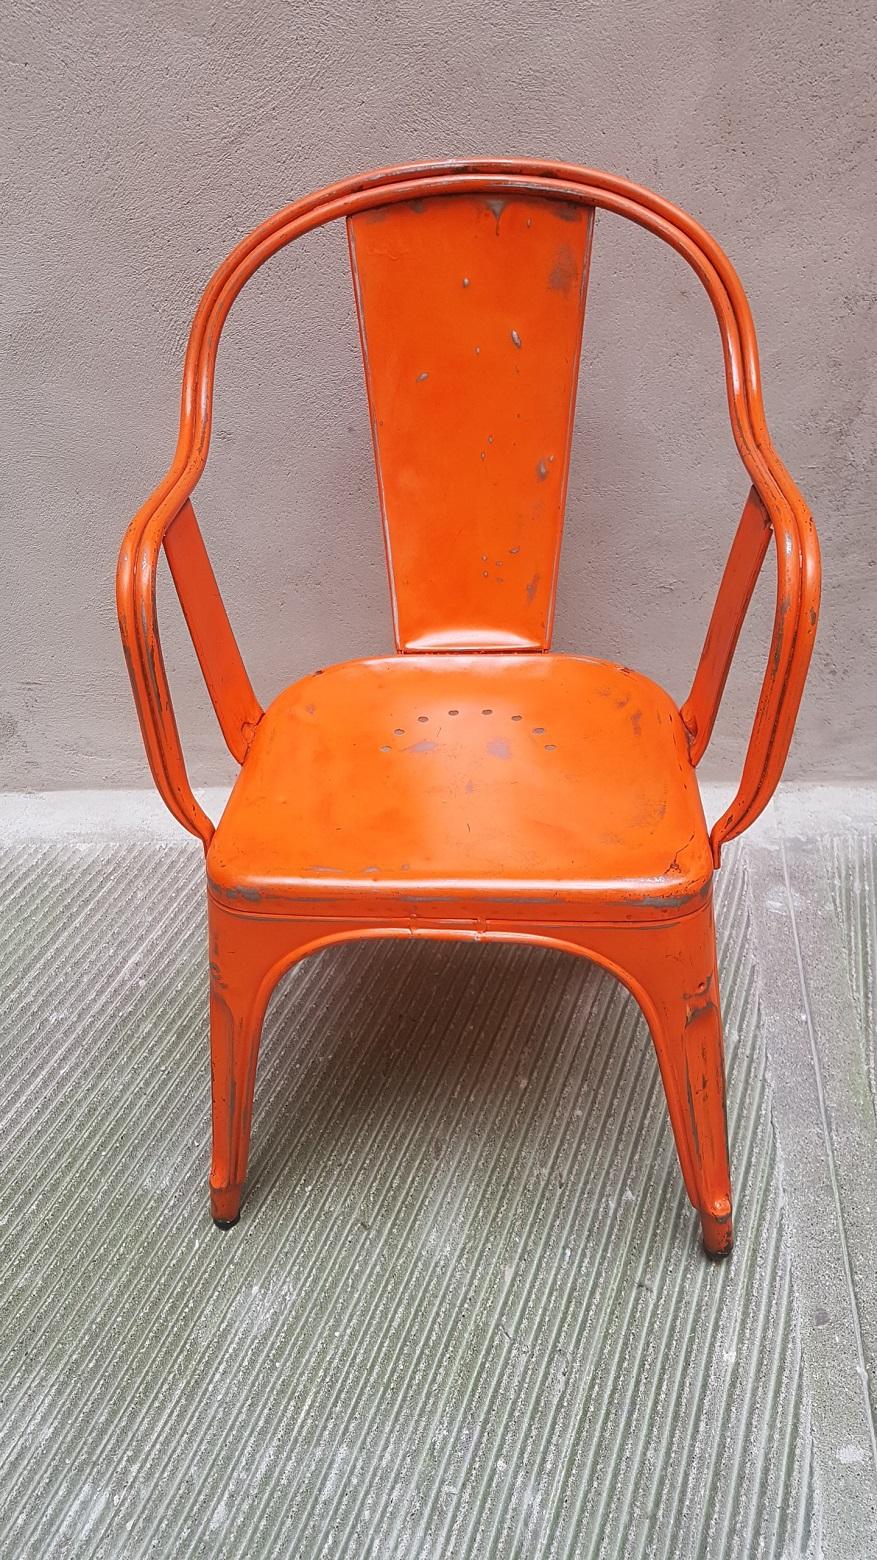 Original Tolix chairs model C. This specific model of Tolix chairs has become really rare and difficult to find. Coming from France circa 1940-1950 they were originally used in the French Bistrots, these 6 charming chairs are in the typical 'Red